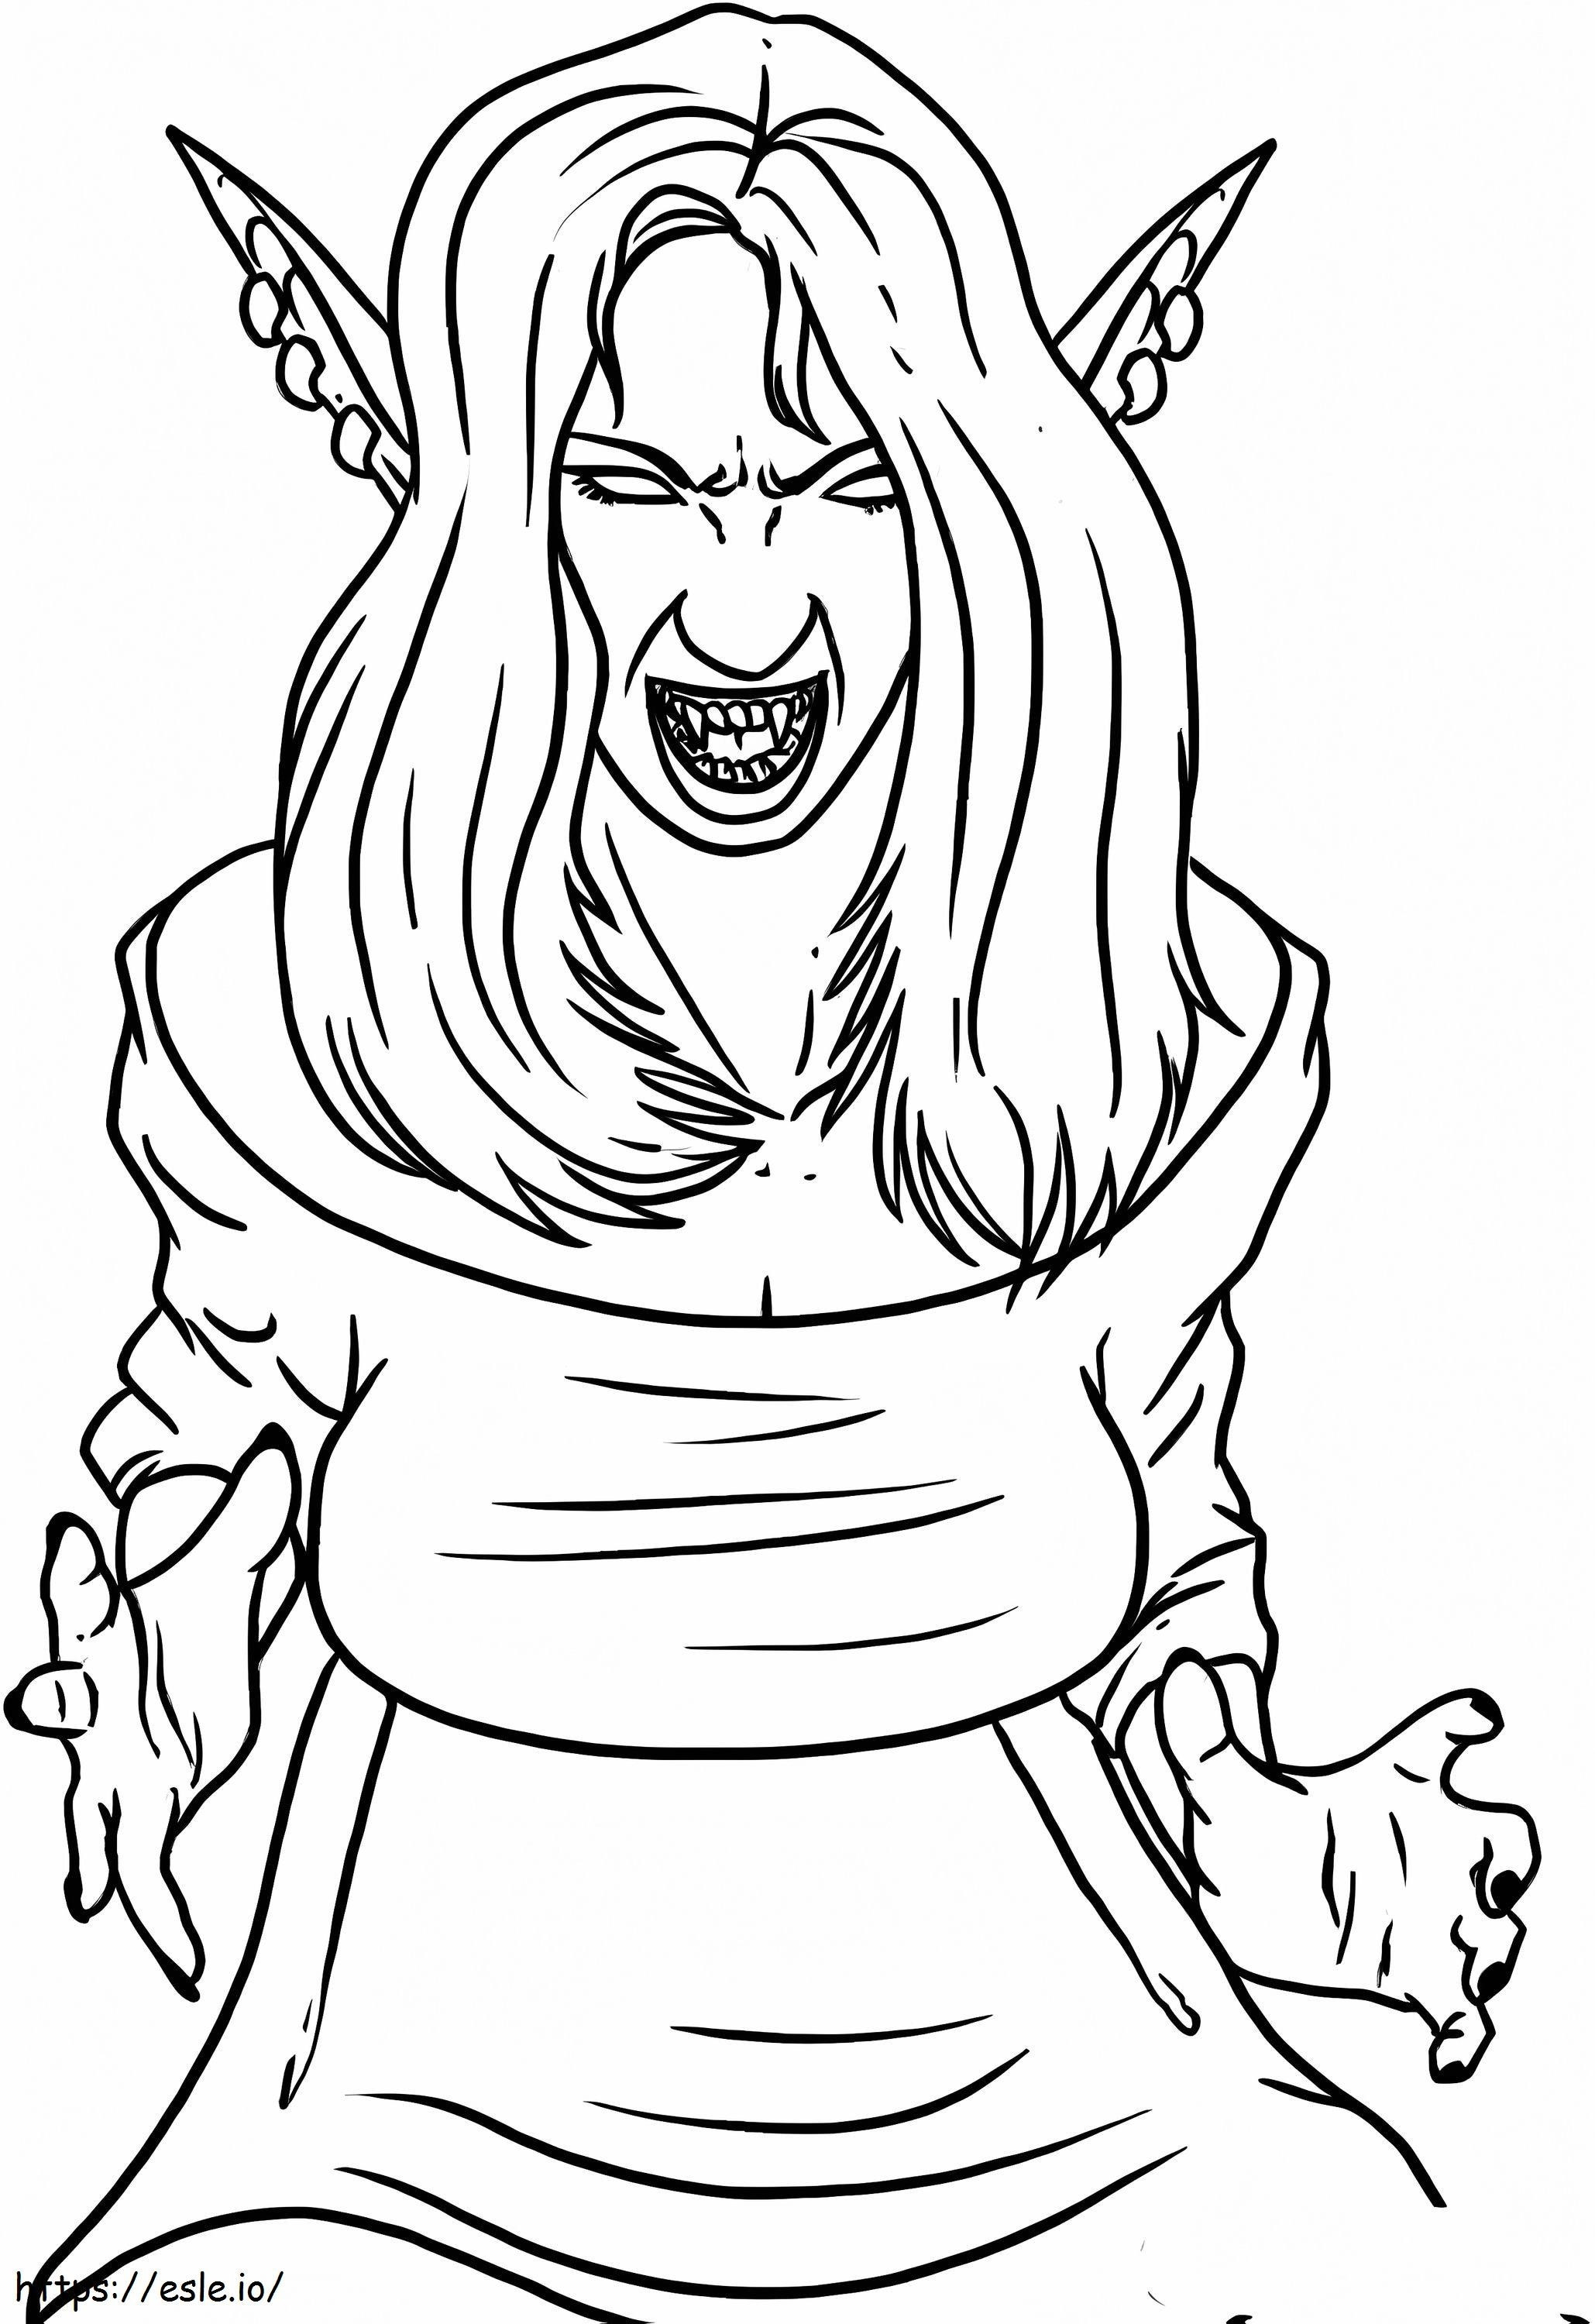 Angry Vampire coloring page